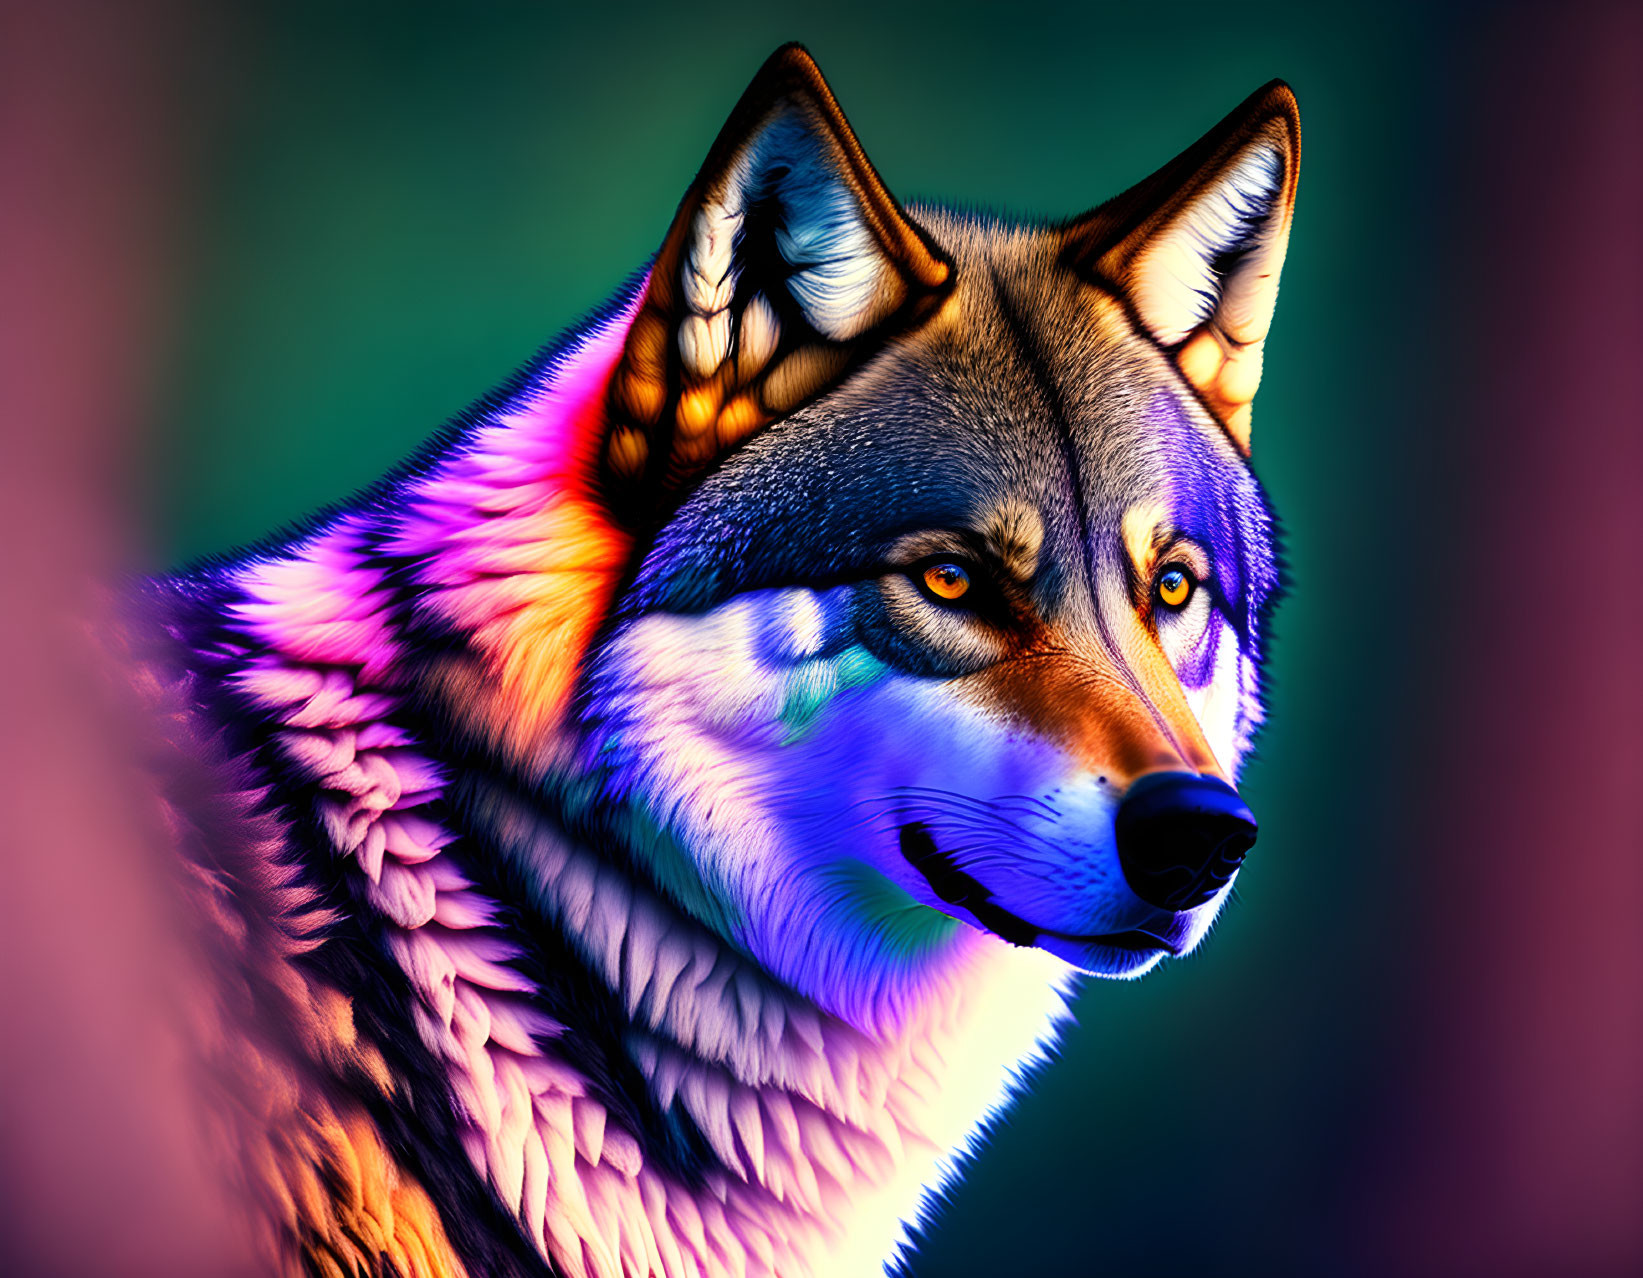 Colorful Wolf Digital Artwork with Sharp Eyes and Blurred Background